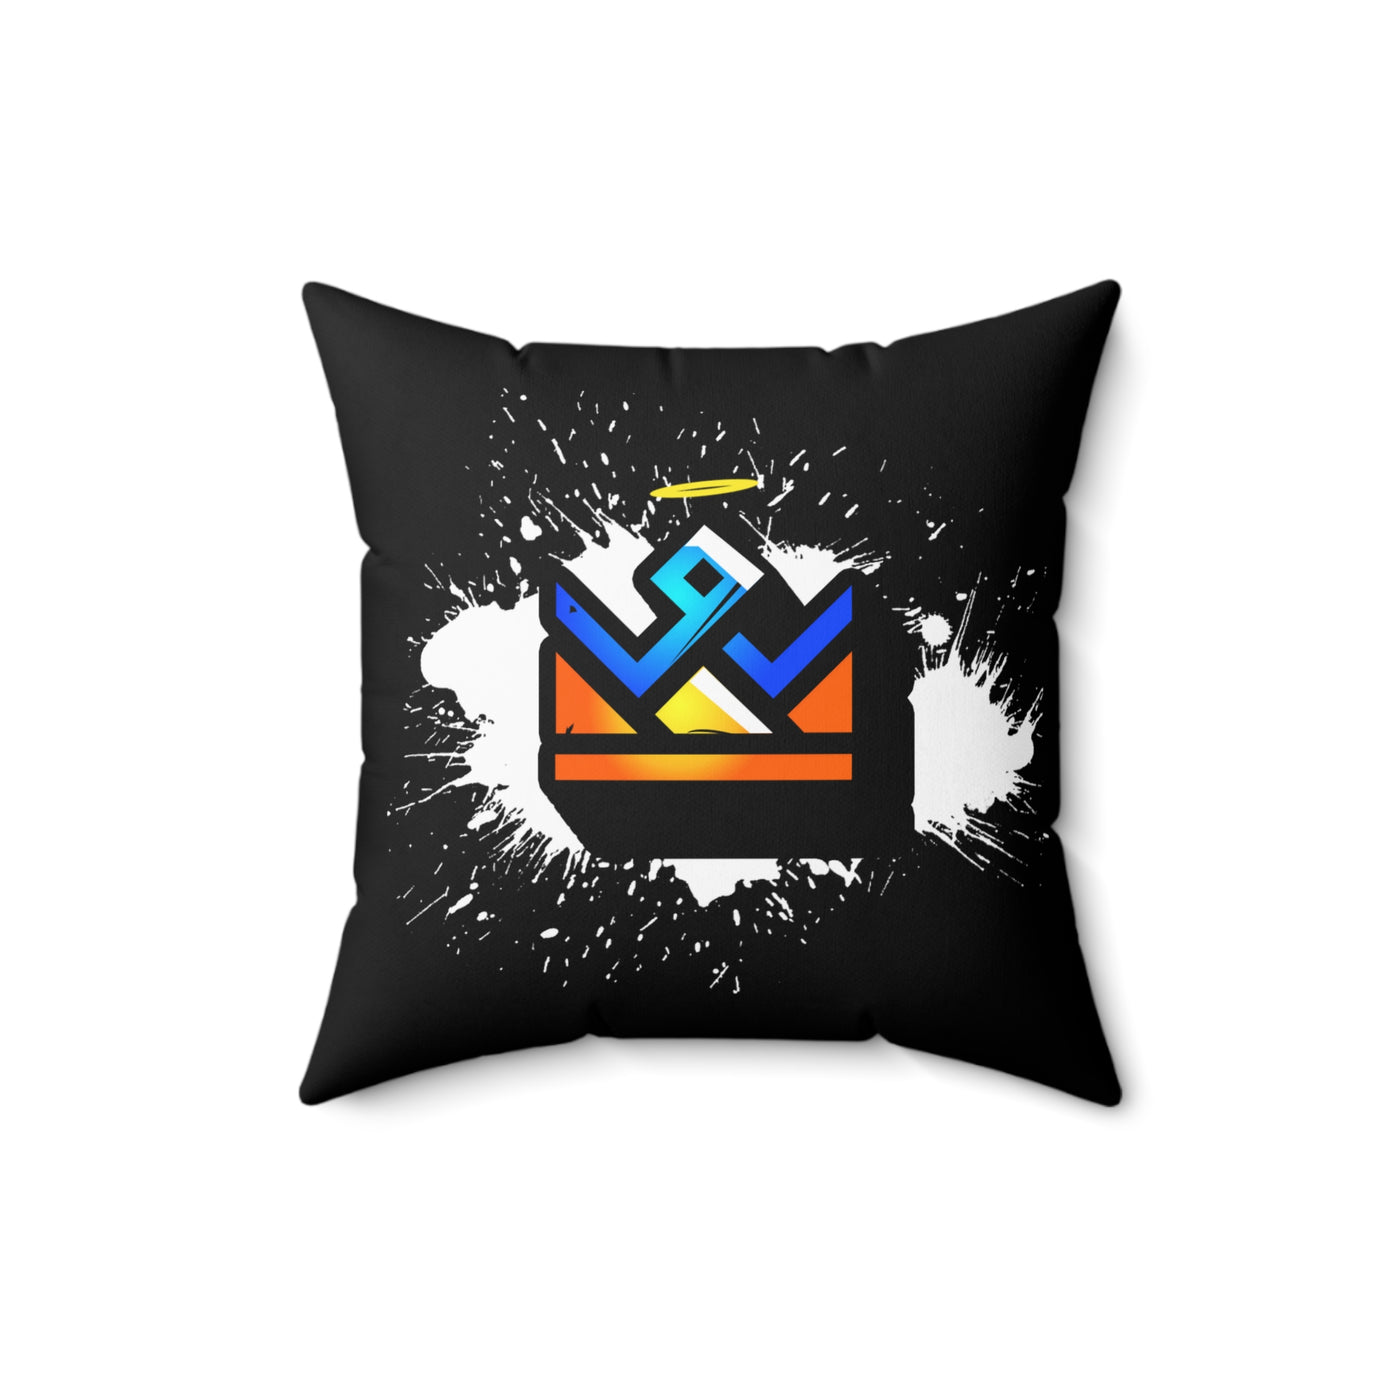 Royalty & Loyalty Square Pillow